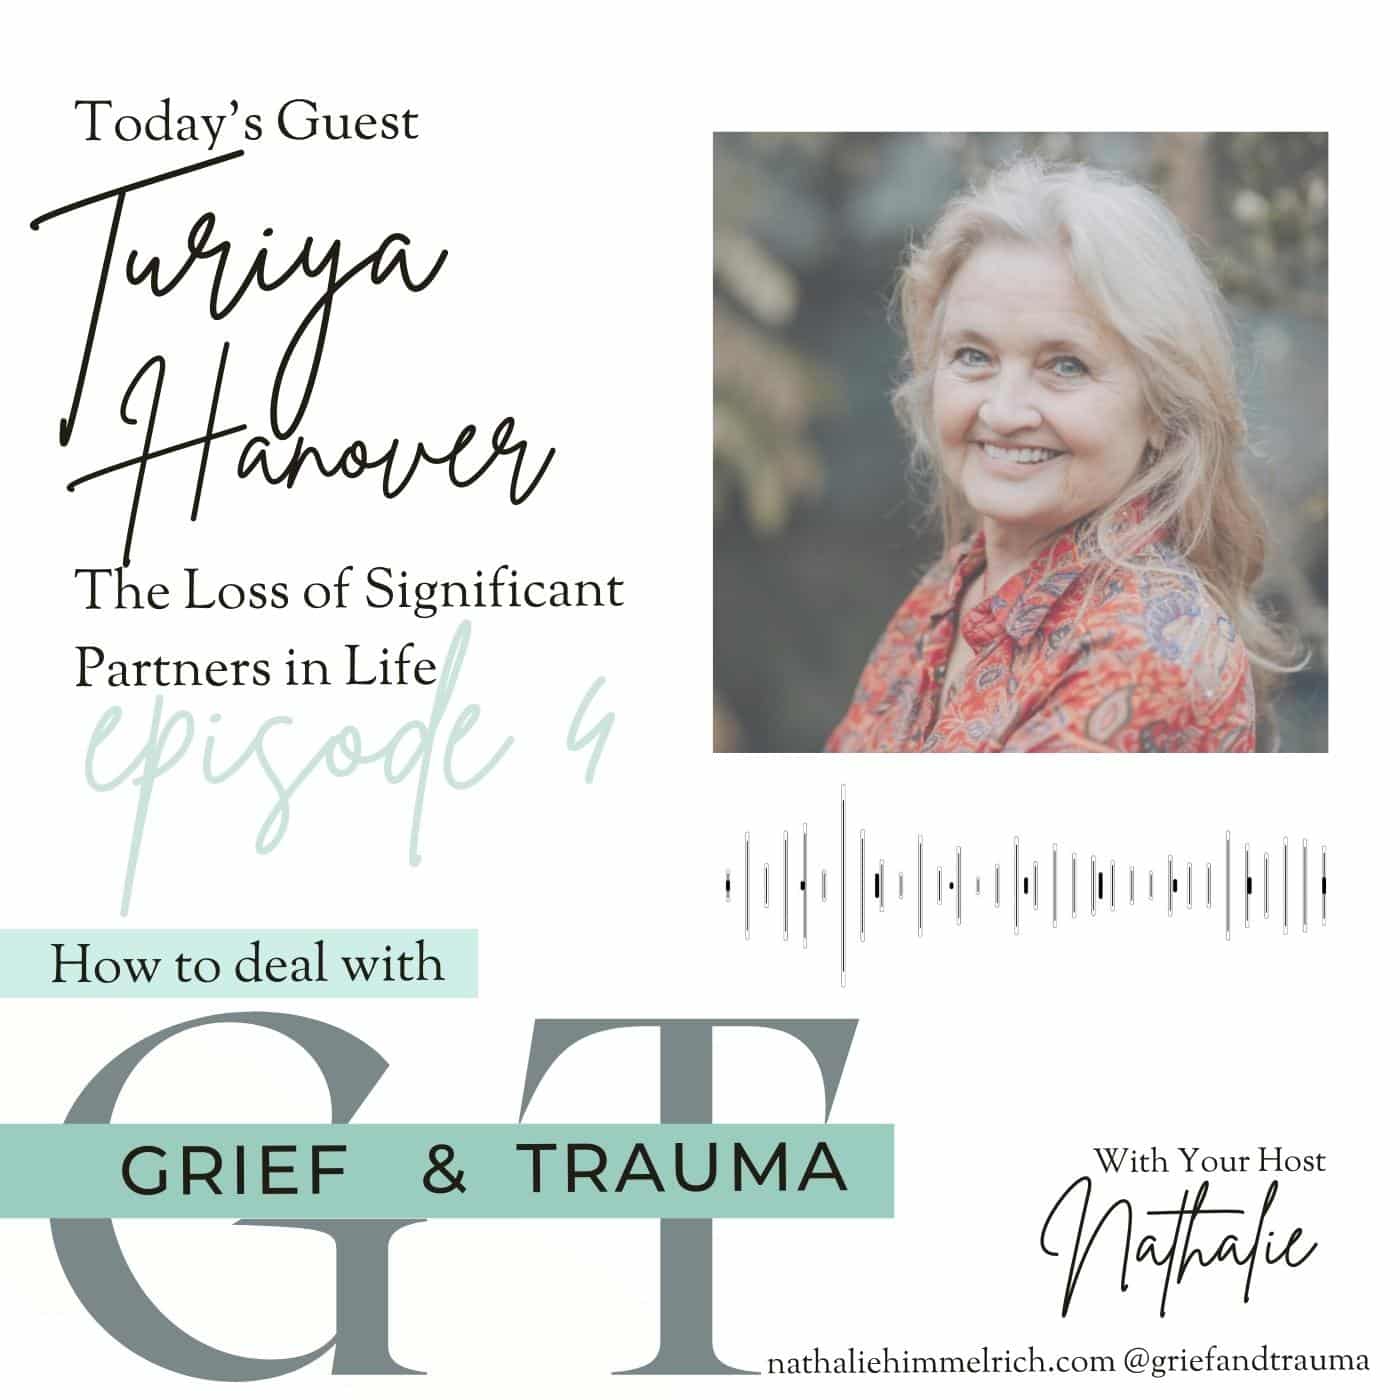 Nathalie with Turiya Hanover on the Loss of Significant Partners in Life | Episode 4